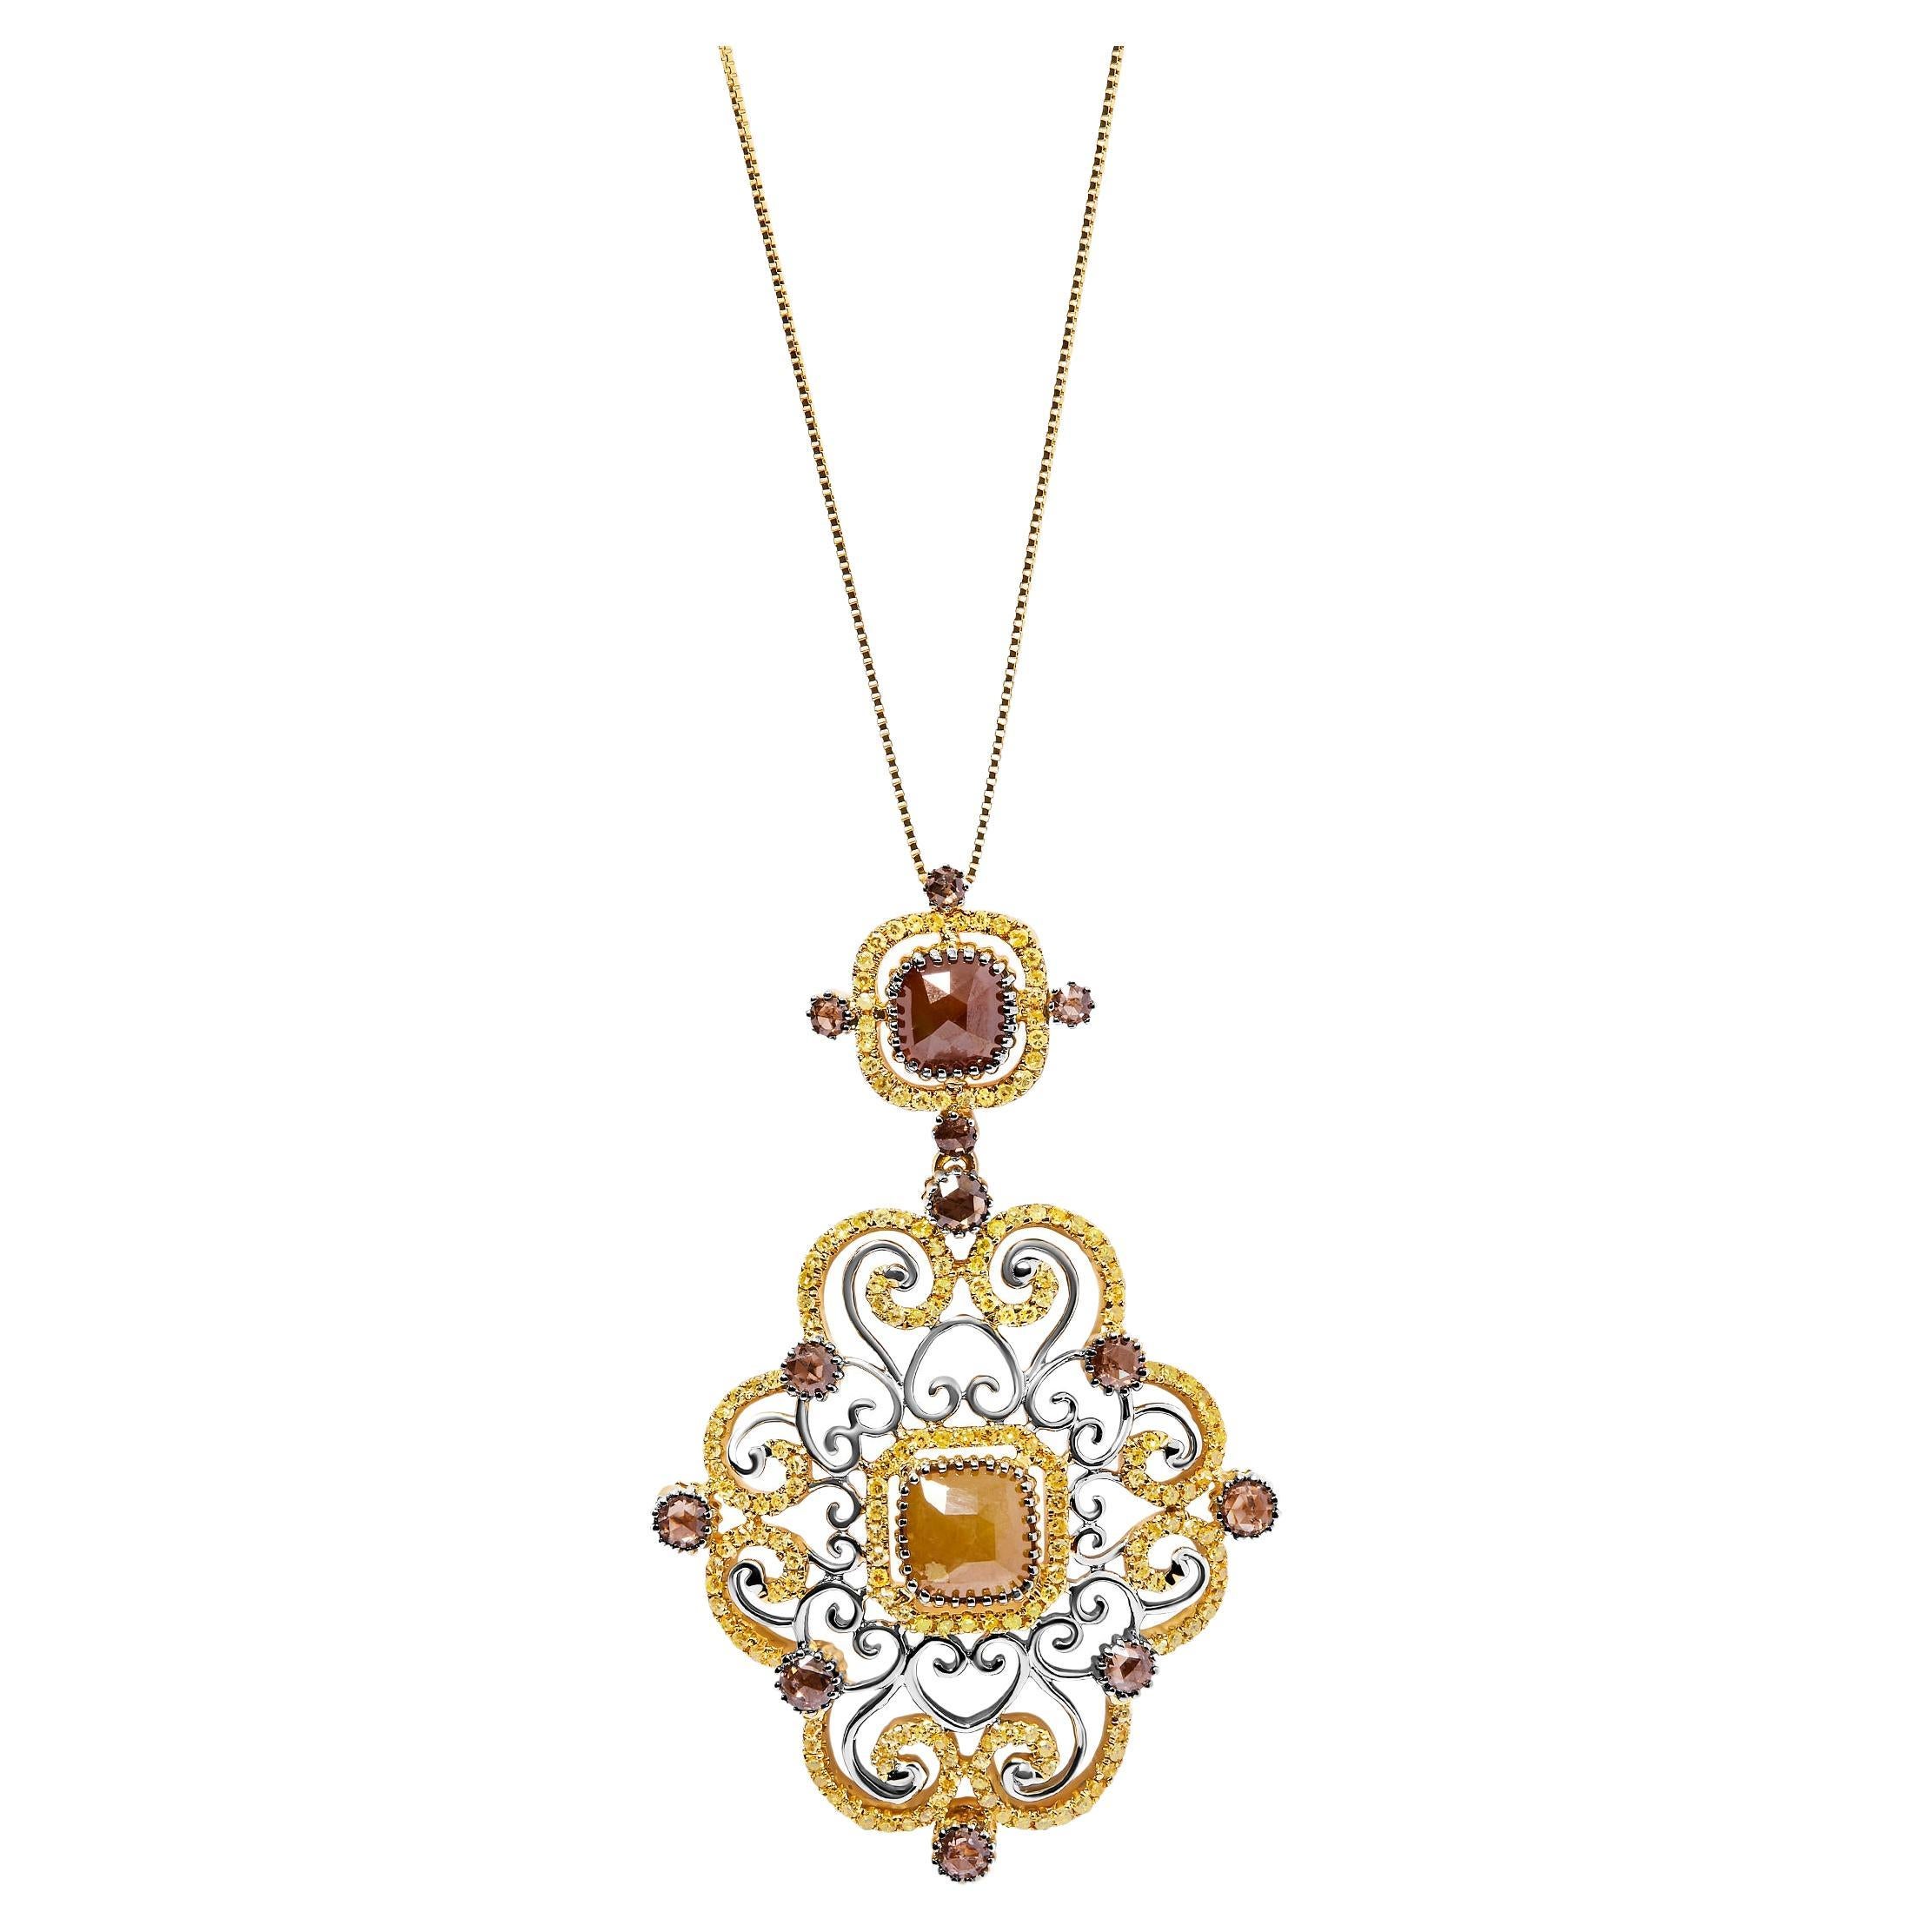 14K White and Yellow Gold 4.0 Carat Diamond Antique Style Pendant Necklace For Sale